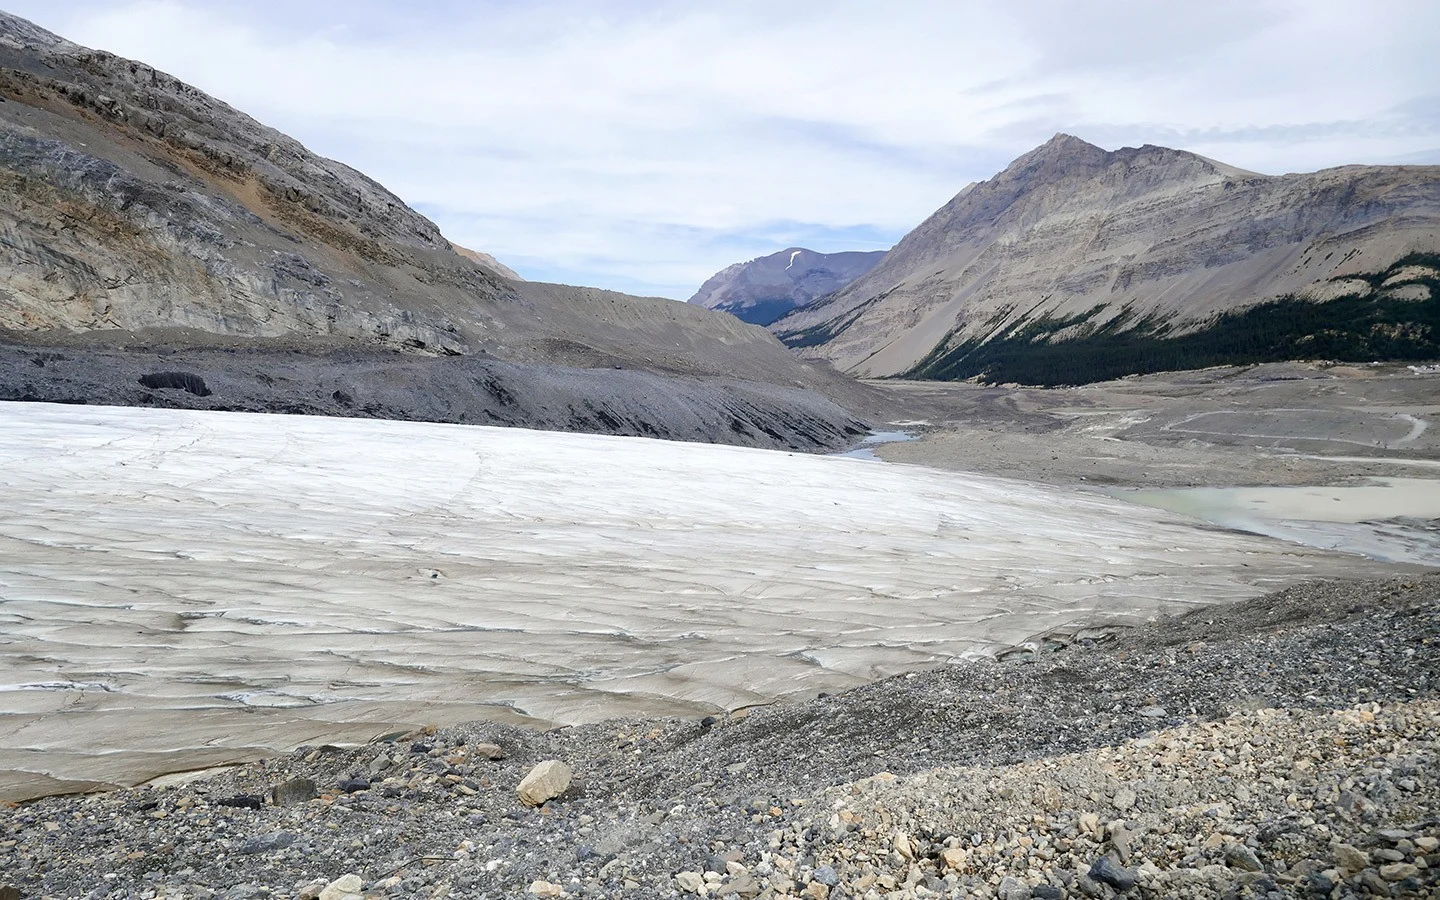 The foot of the Athabasca Glacier